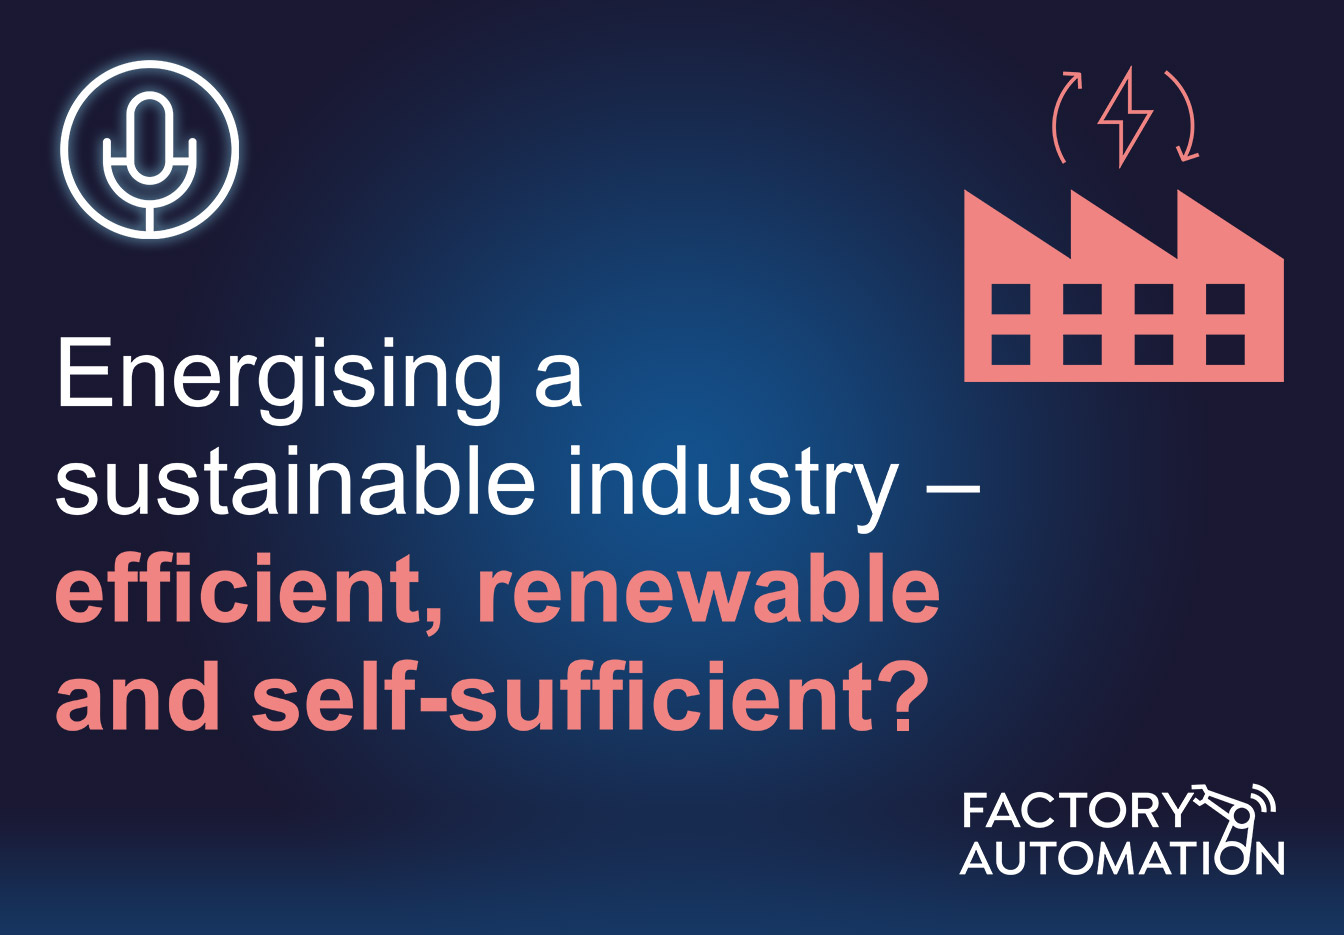 factory automation – energising a sustainable industry